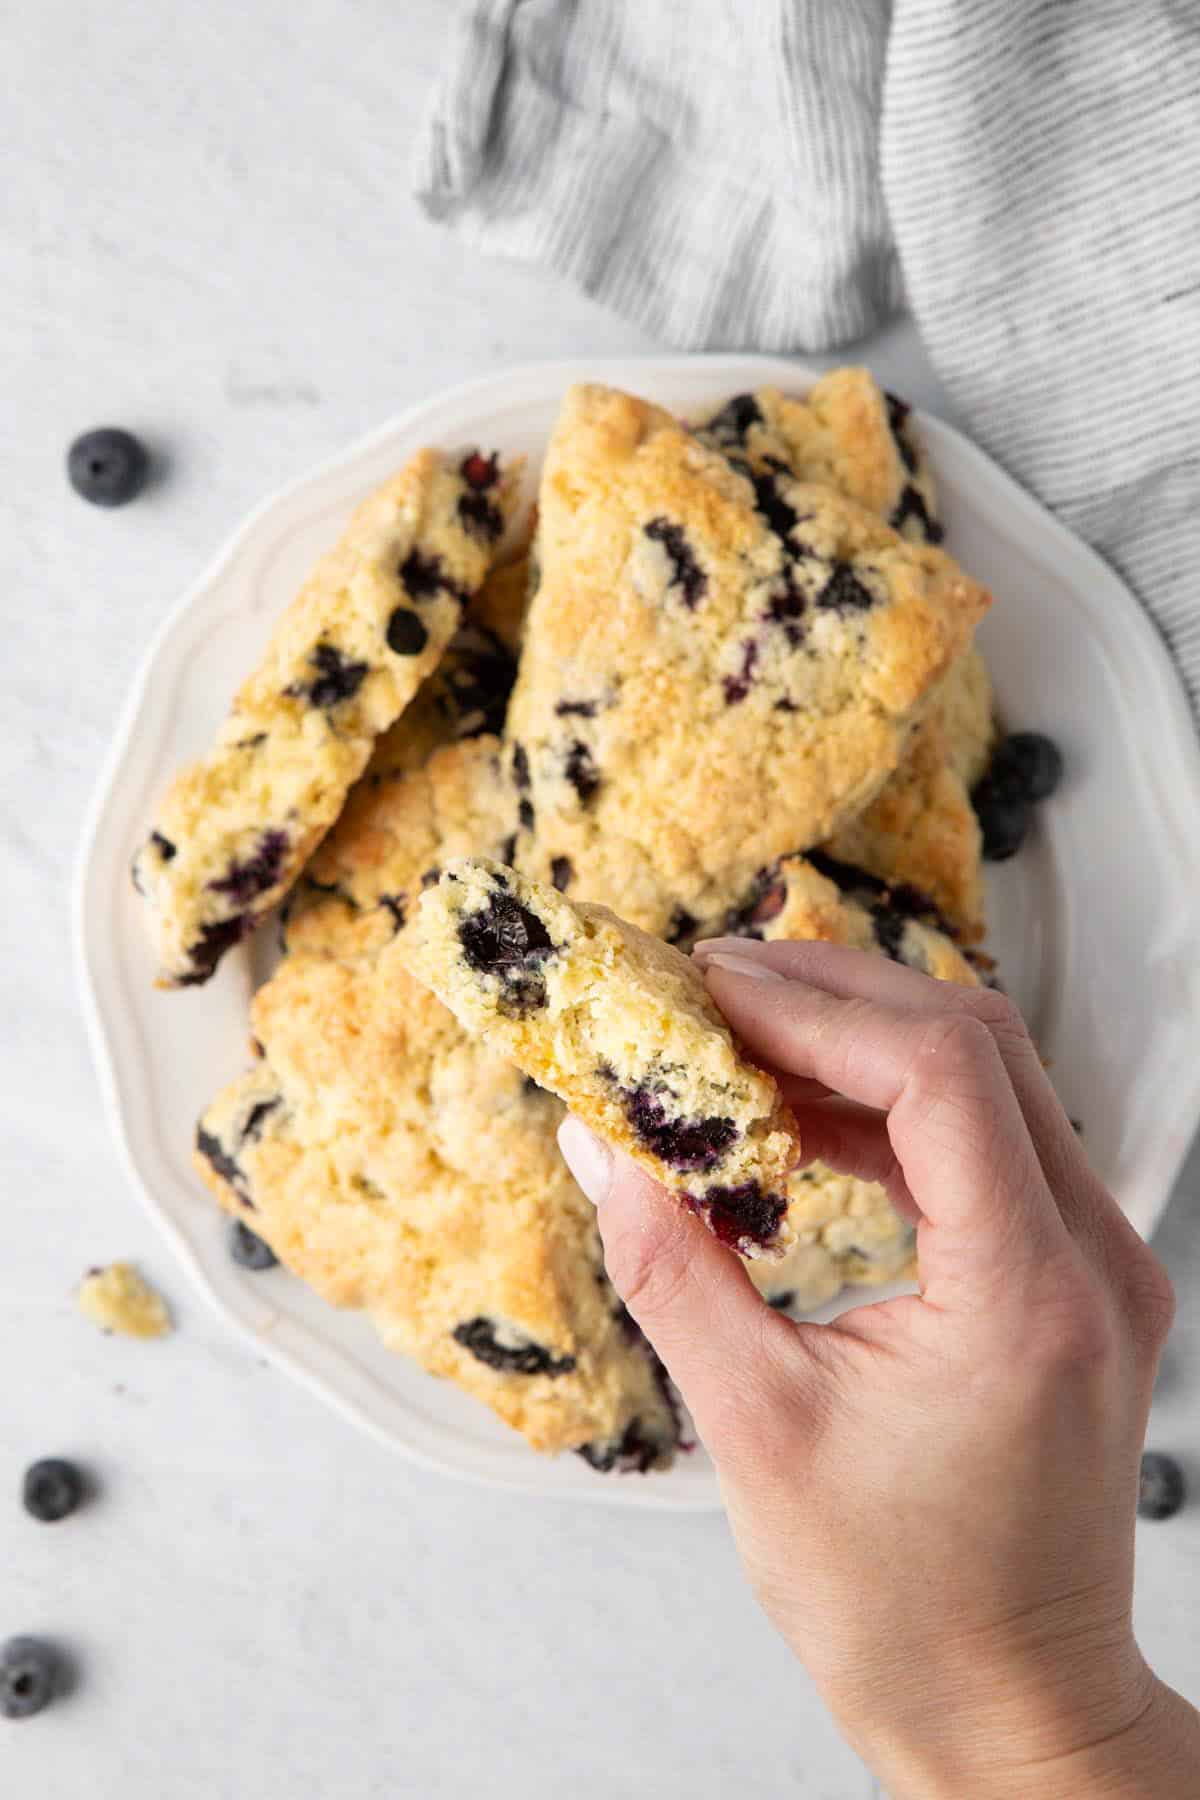 Overlapping scones on plate, with one on plate ripped in half and a hand holding the other close to show texture inside.